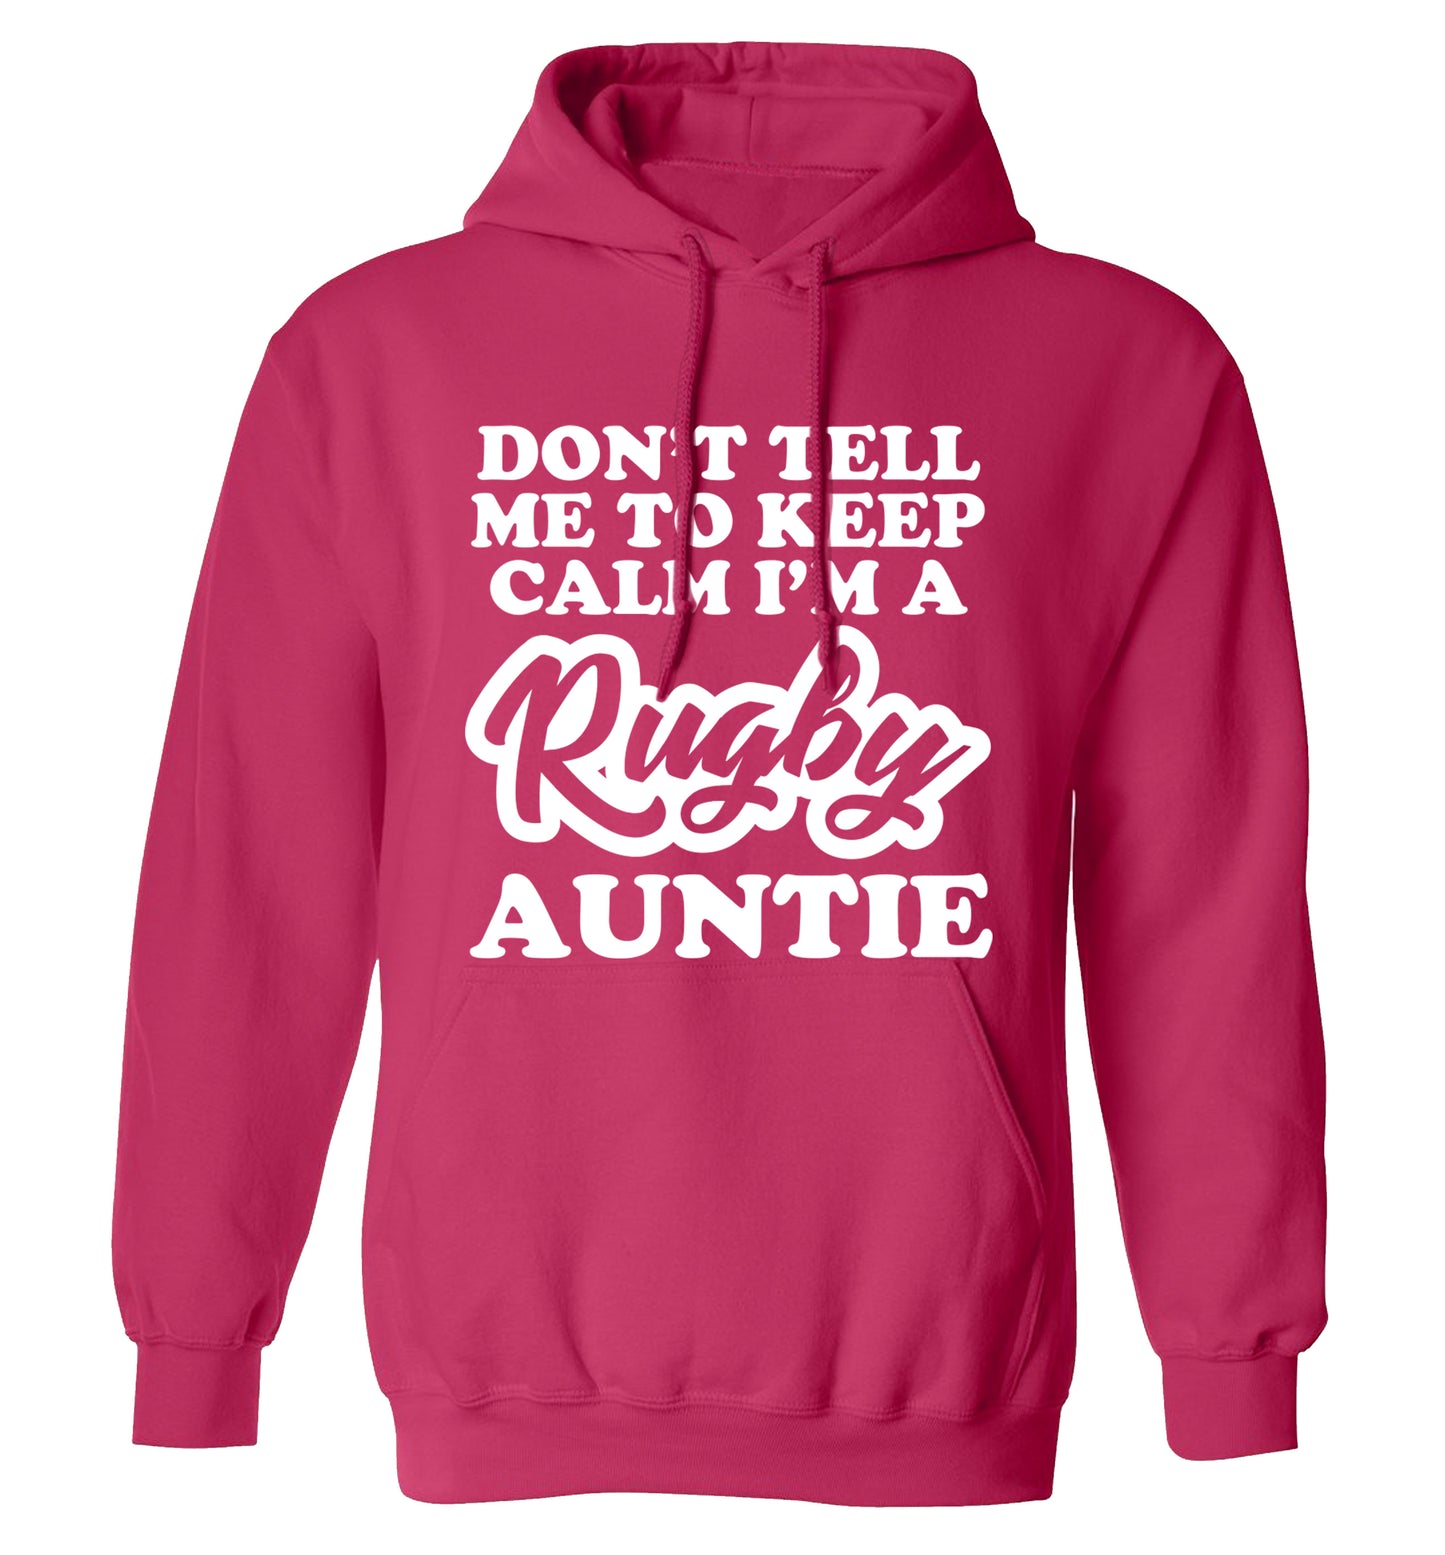 Don't tell me keep calm I'm a rugby auntie adults unisex pink hoodie 2XL